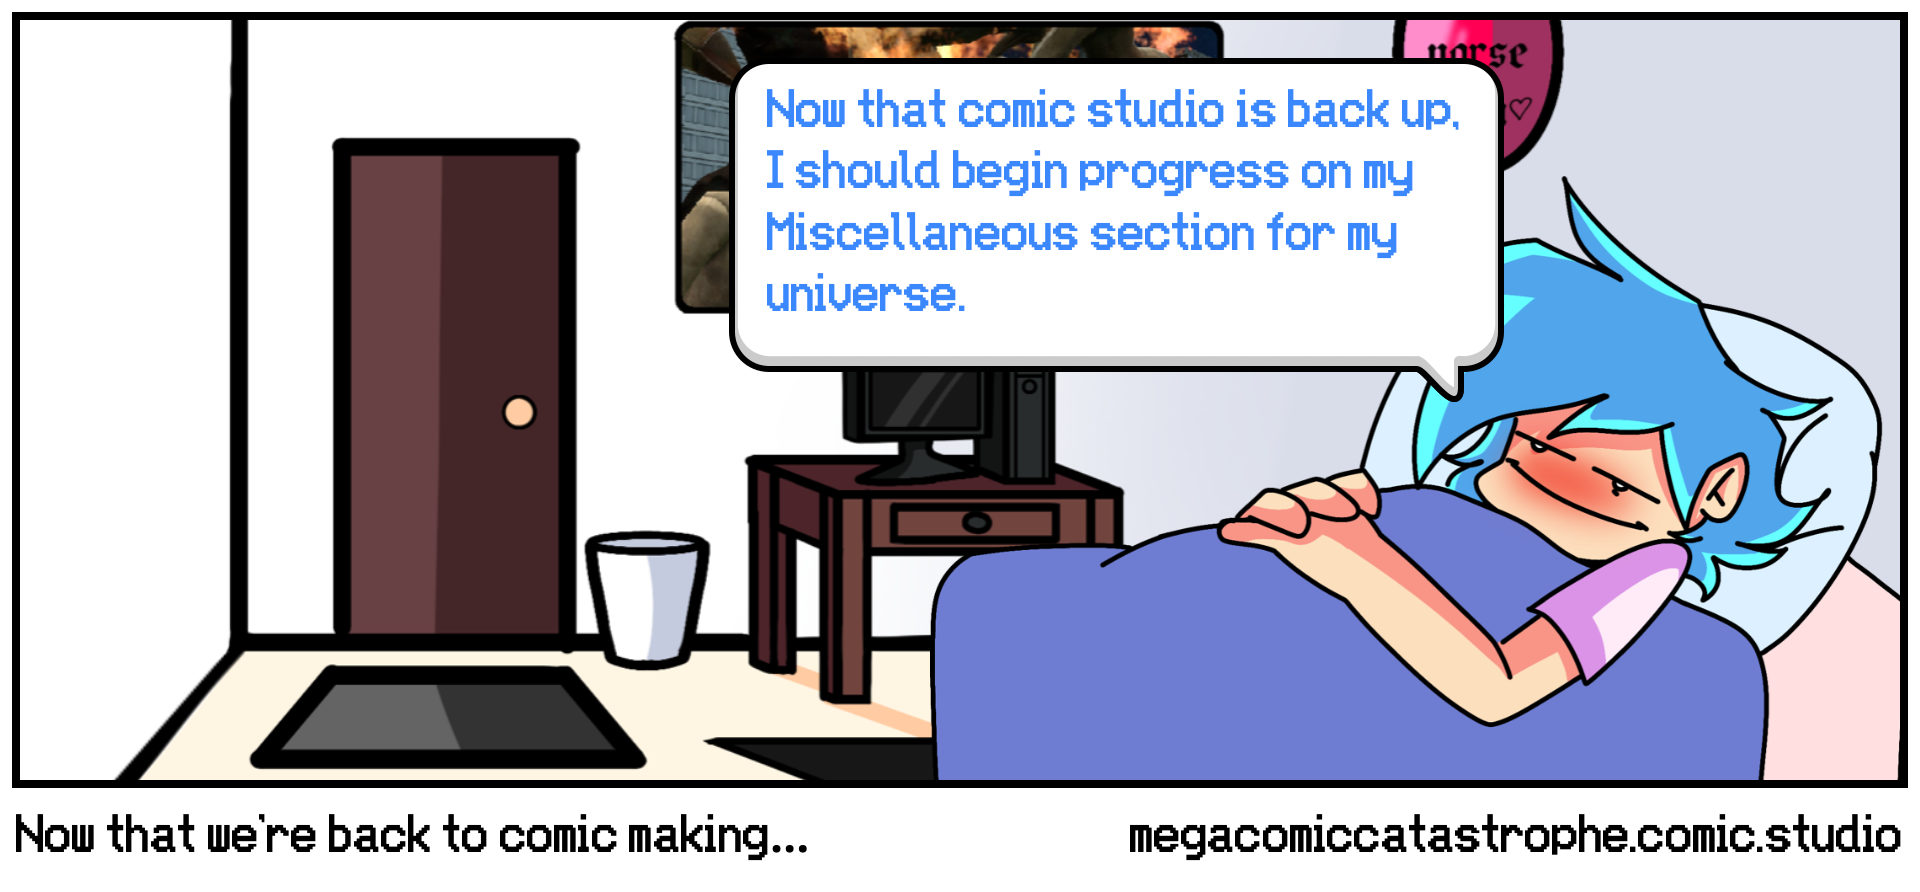 Now that we’re back to comic making…